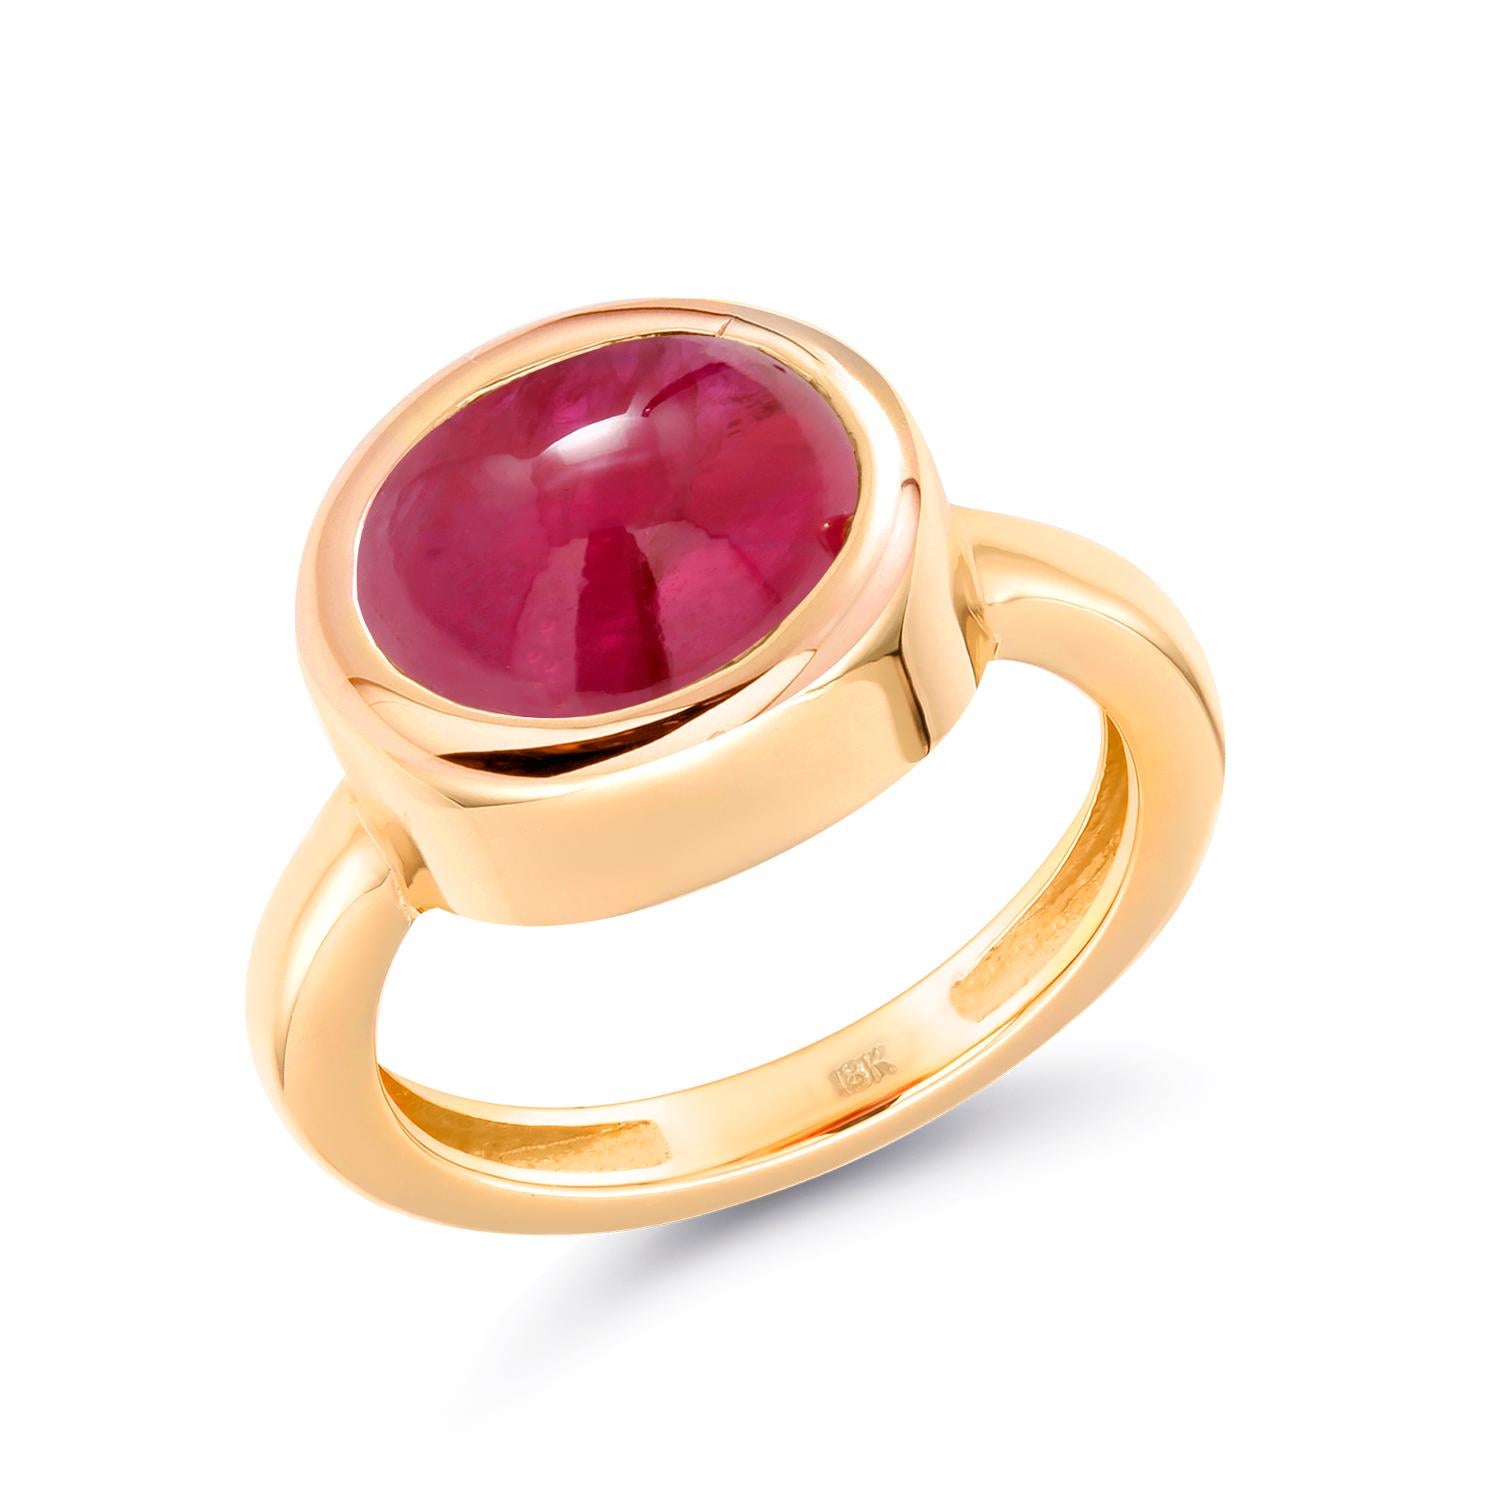 Women's Eighteen Karat Yellow Gold Cabochon Burma Ruby High Dome Cocktail Solitaire Ring